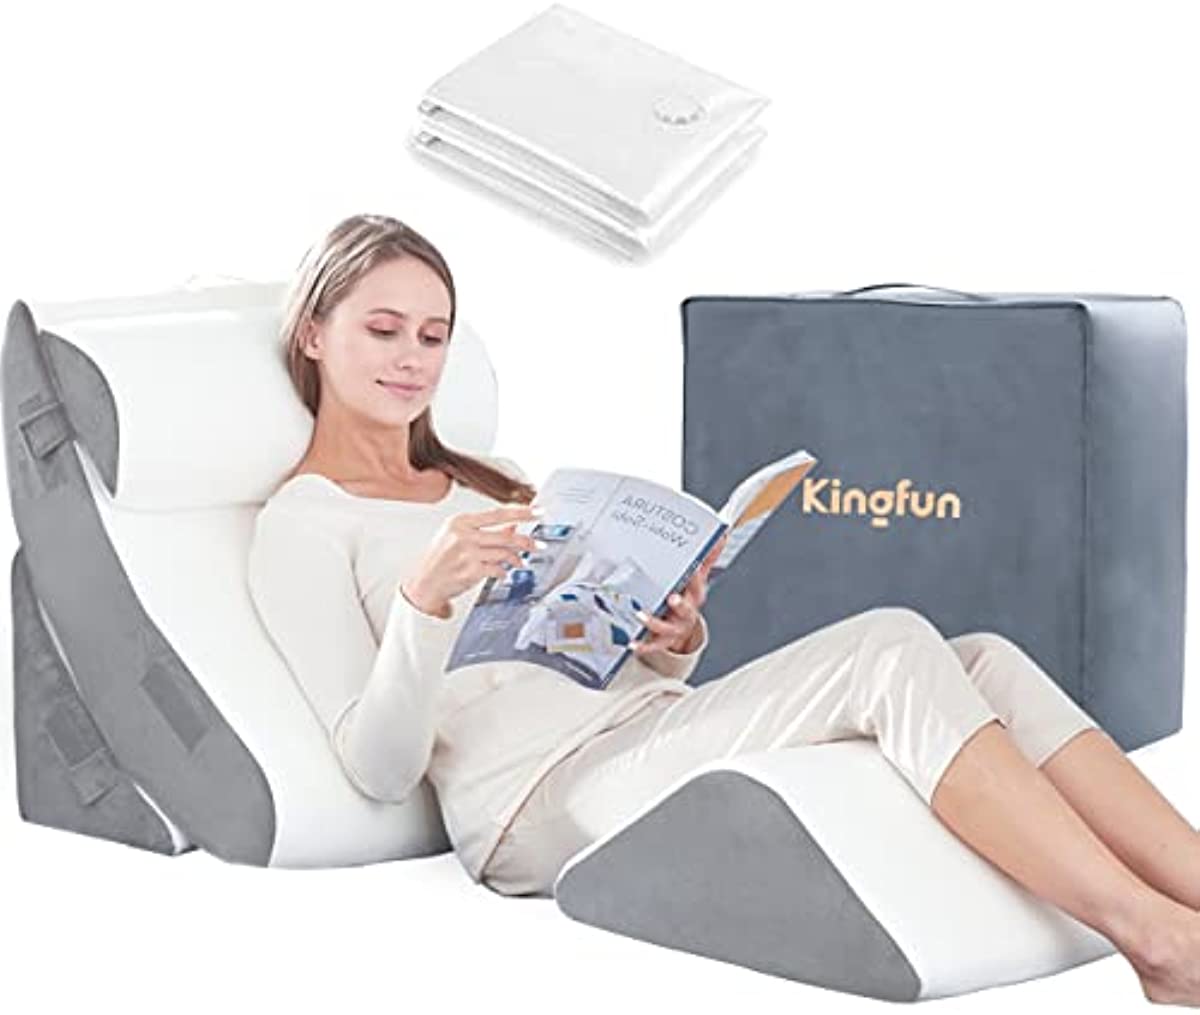 Kingfun 4pcs Orthopedic Bed Wedge Pillow Set, Post Surgery Memory Foam Wedge Pillows for Sleeping, Adjustable Leg, Back Support, Arm Pillow, Sitting Up Bed Rest Sleep Pillow with Travel Bag